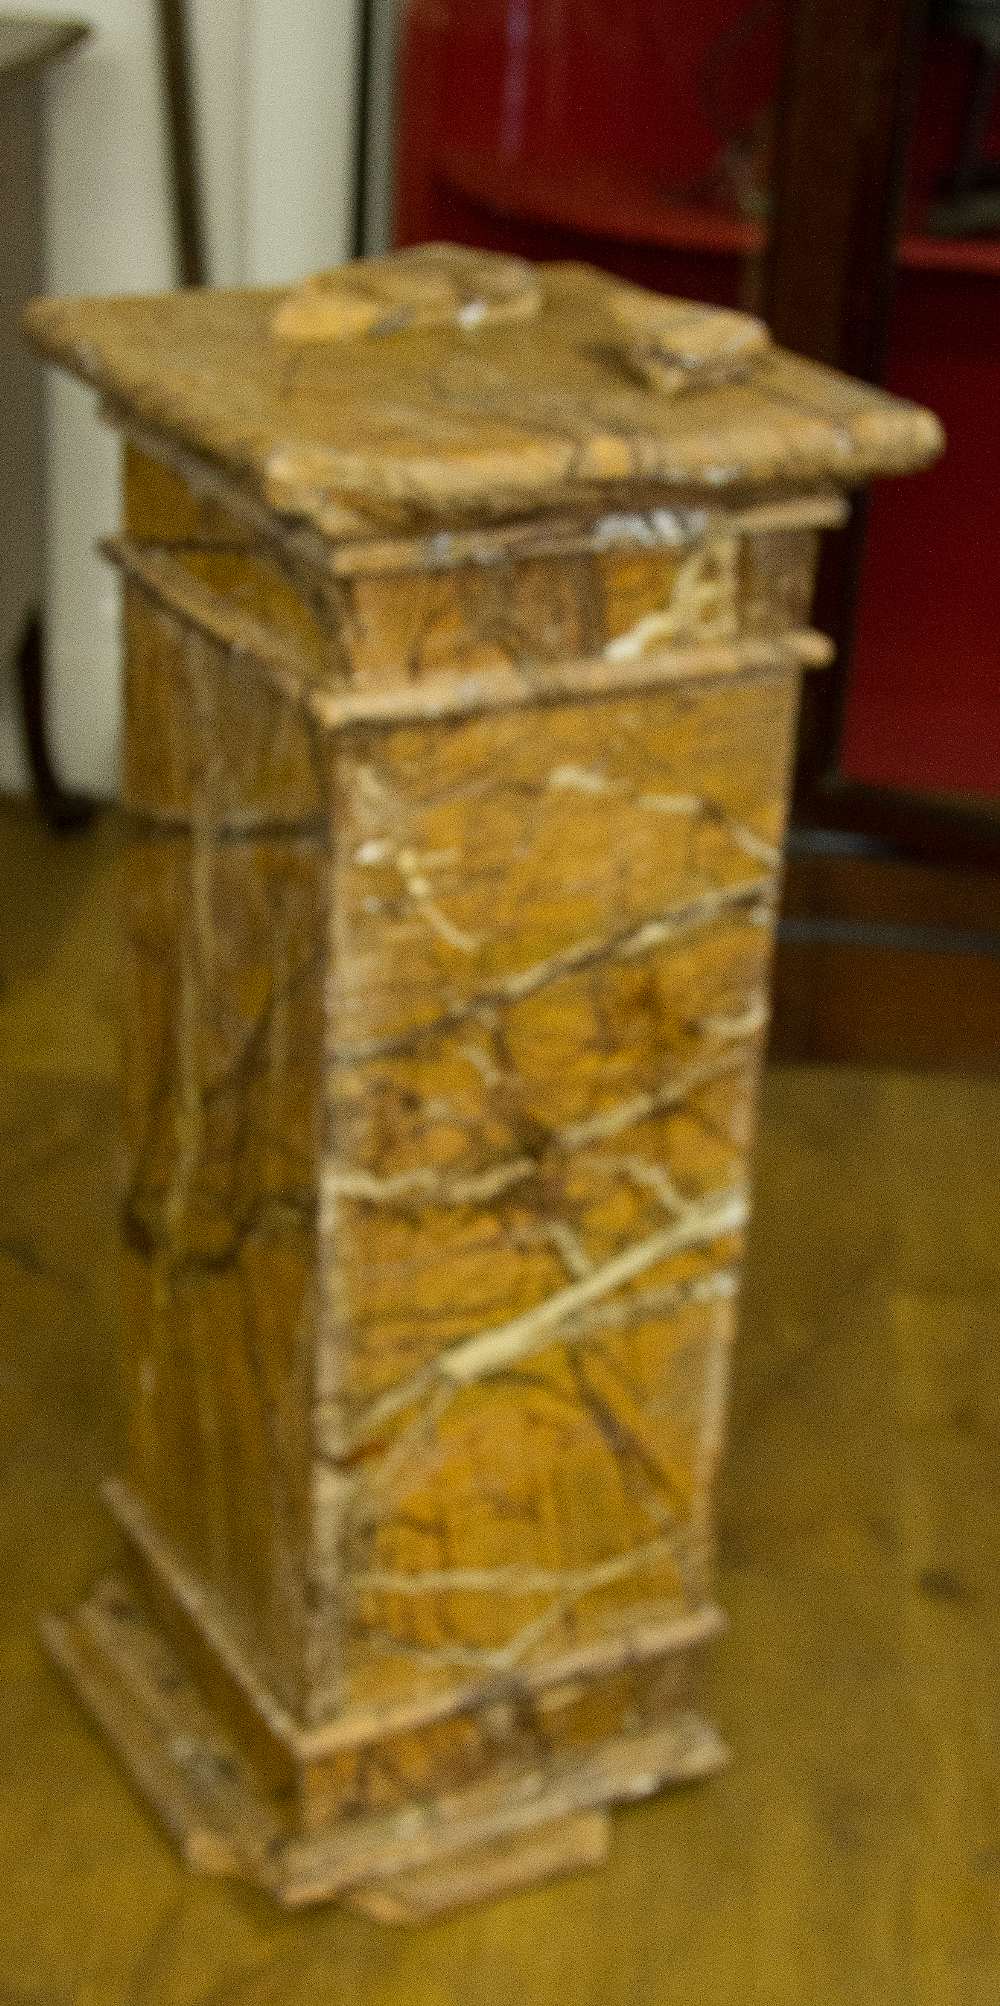 A COMPOSITION STONE PLINTH, in the form of a square pillar with marbled finish, W 100 cm, A/F